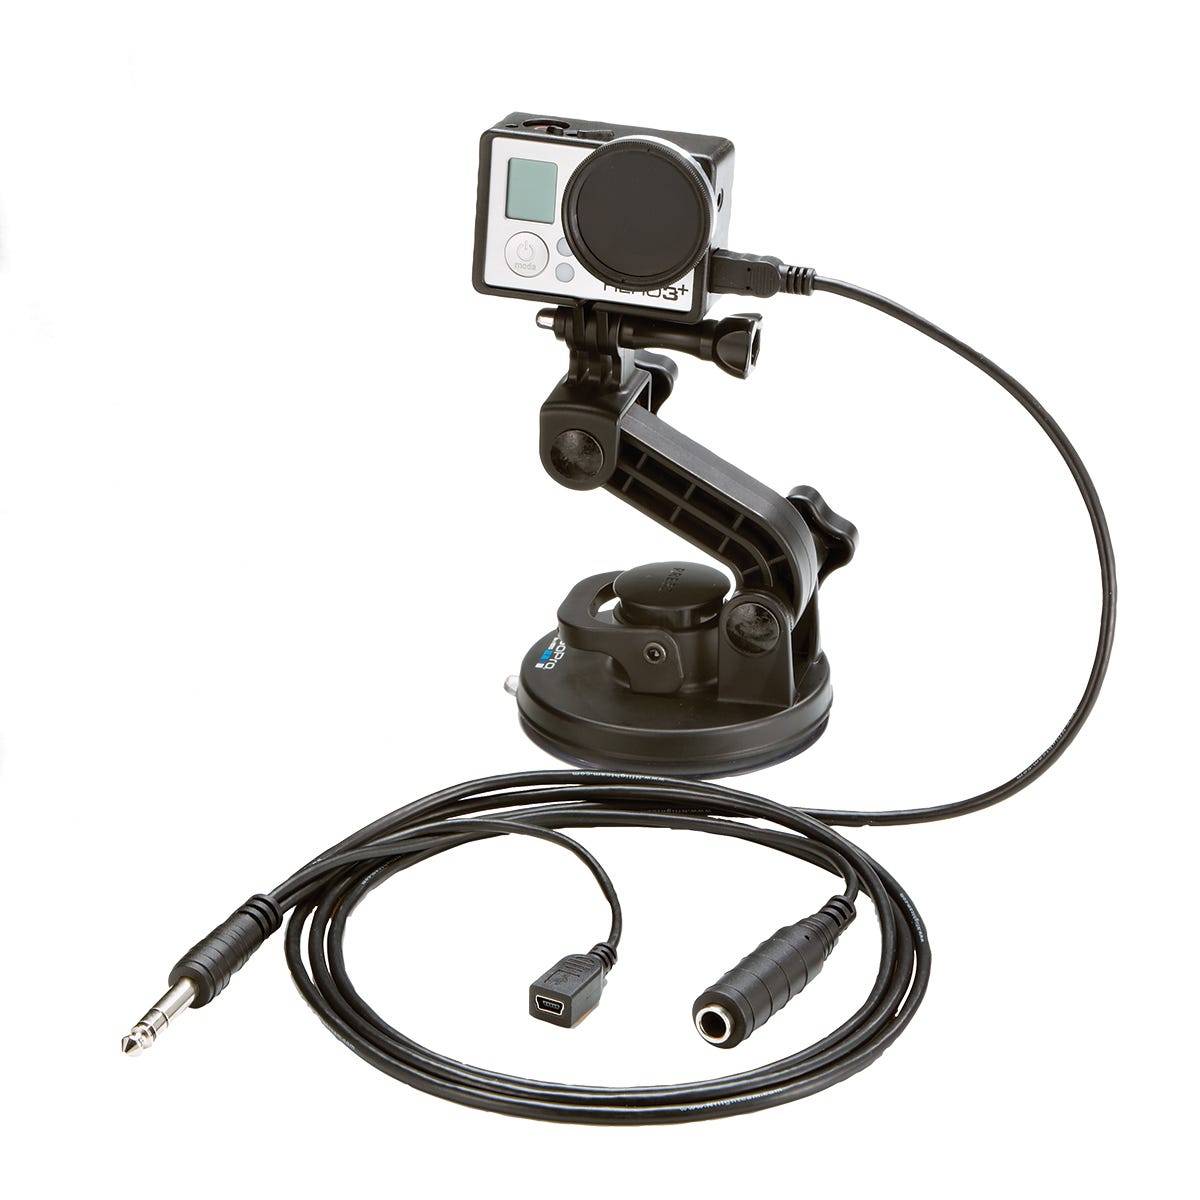 GoPro Hero3, Hero3+, and Hero4 Audio Cable - from Sporty's Pilot Shop